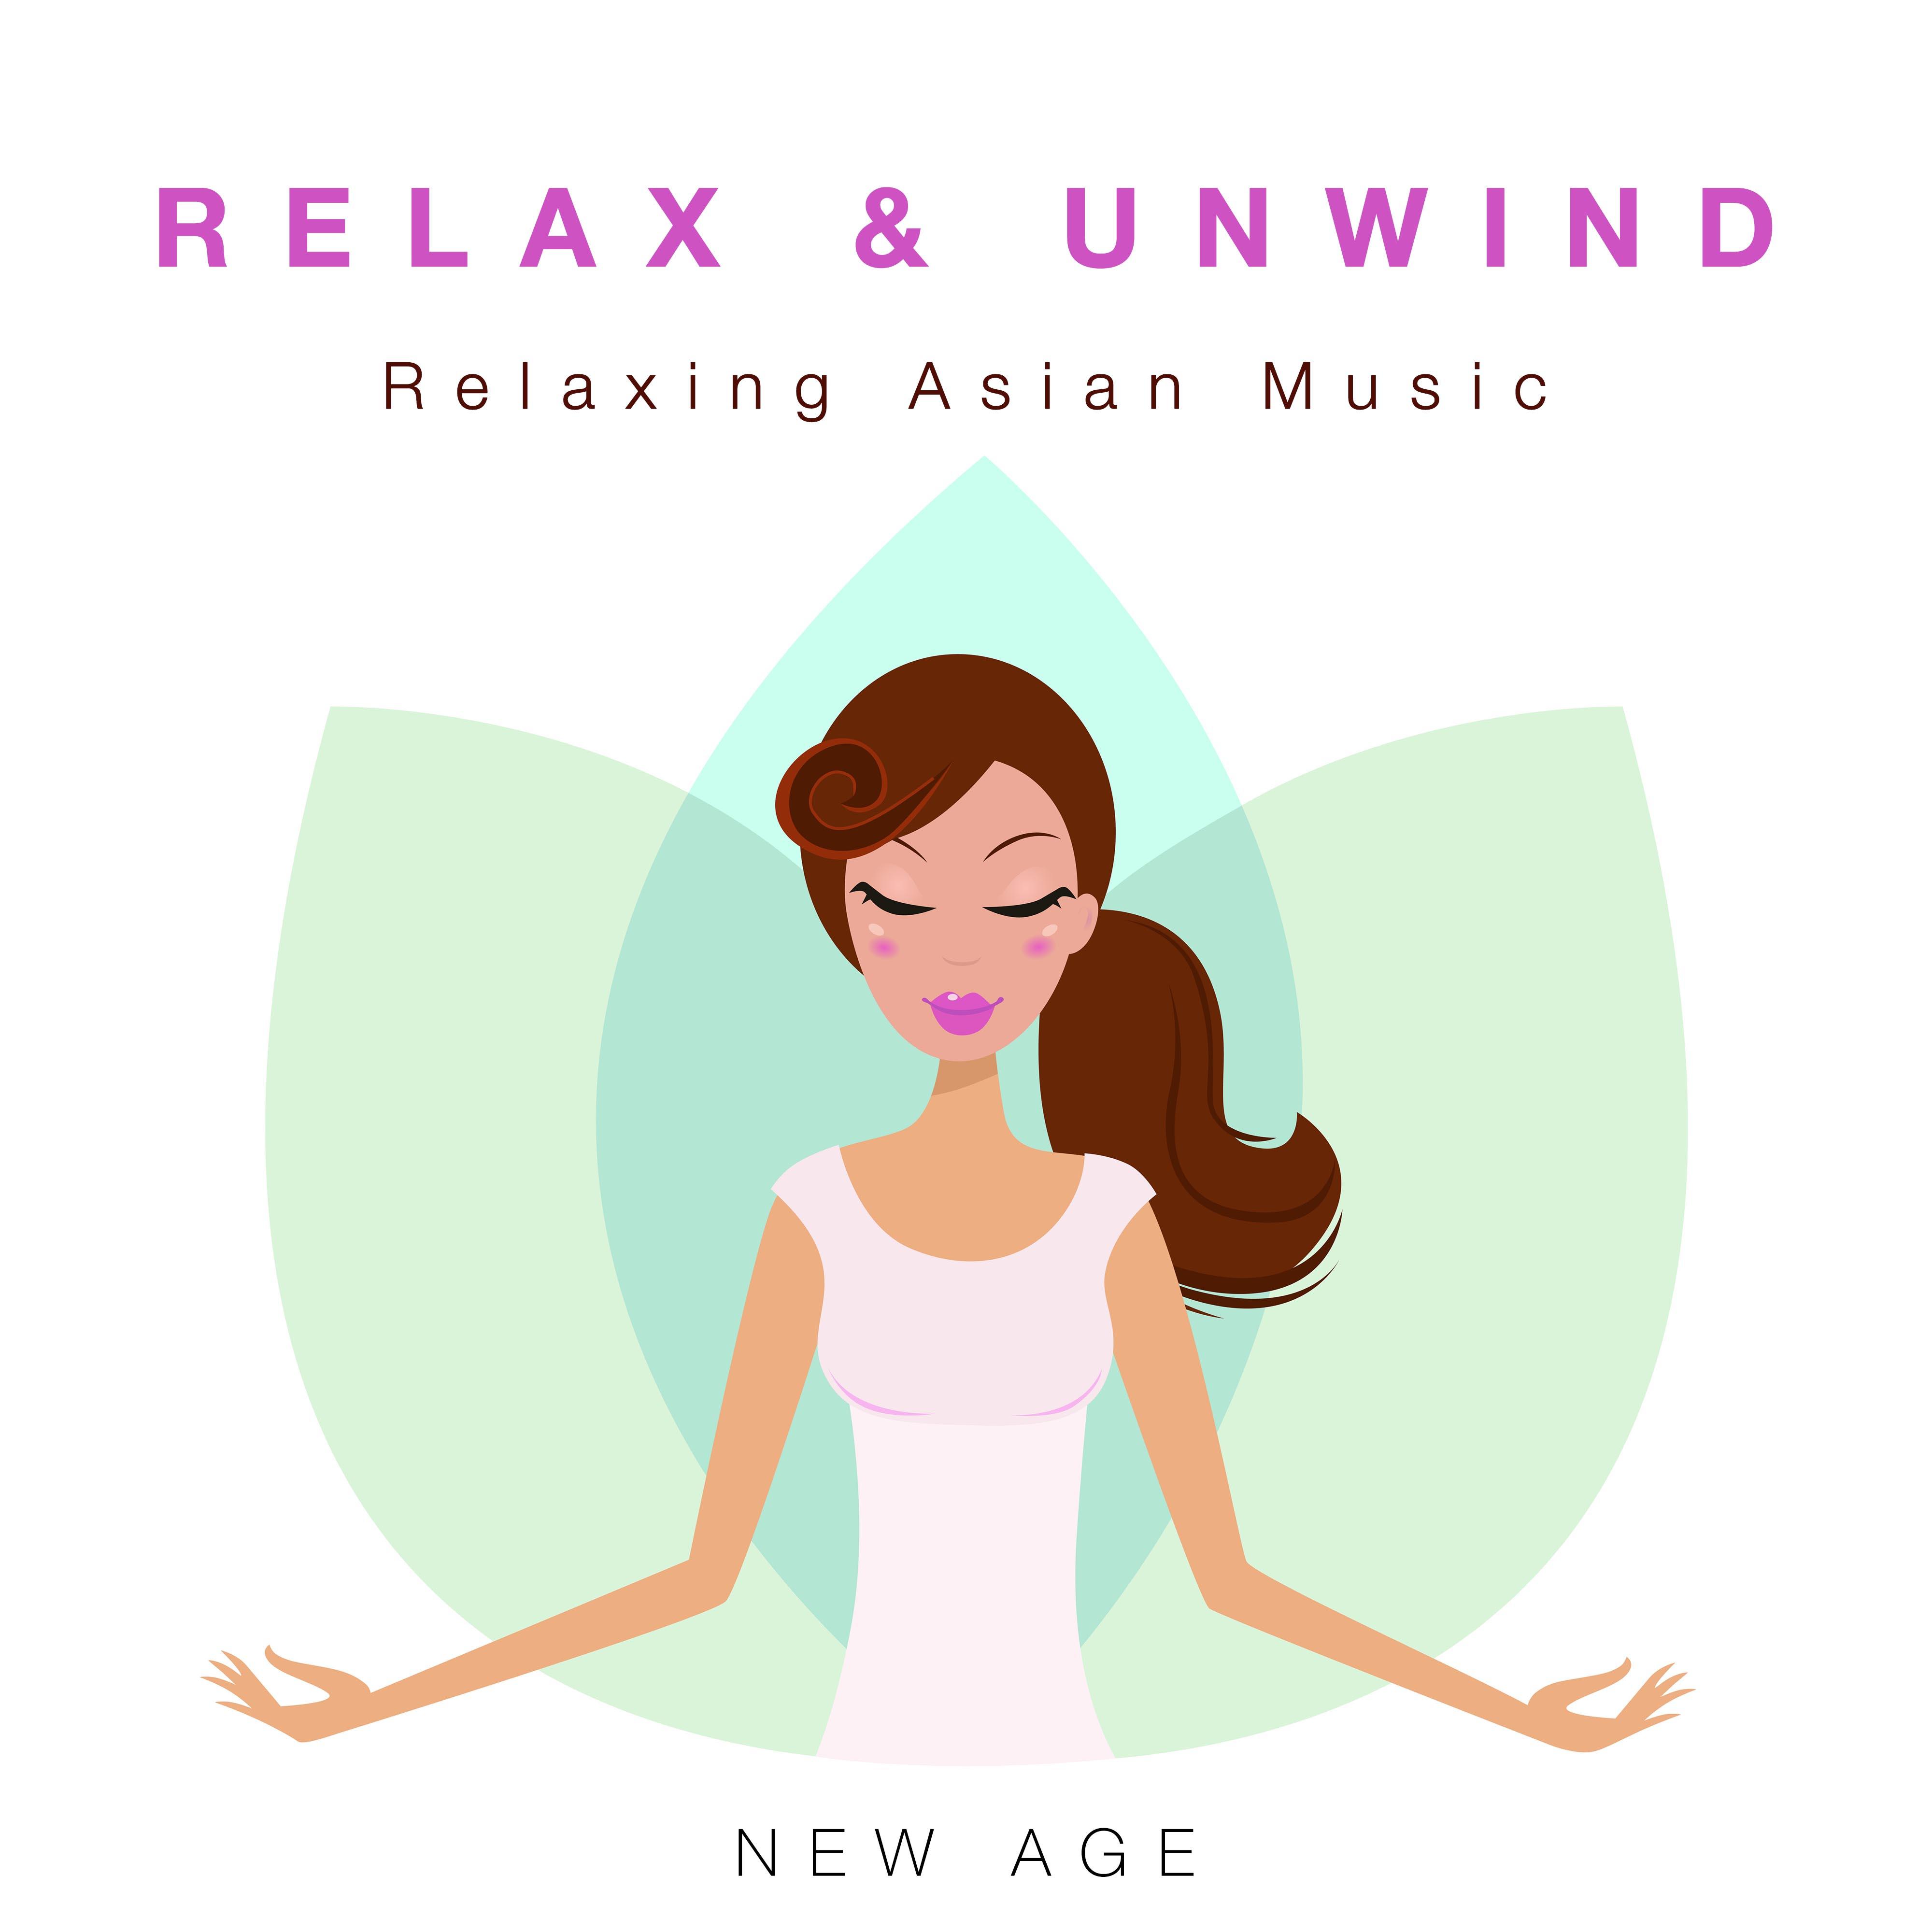 Relax & Unwind - Relaxing Asian Music (New Age)